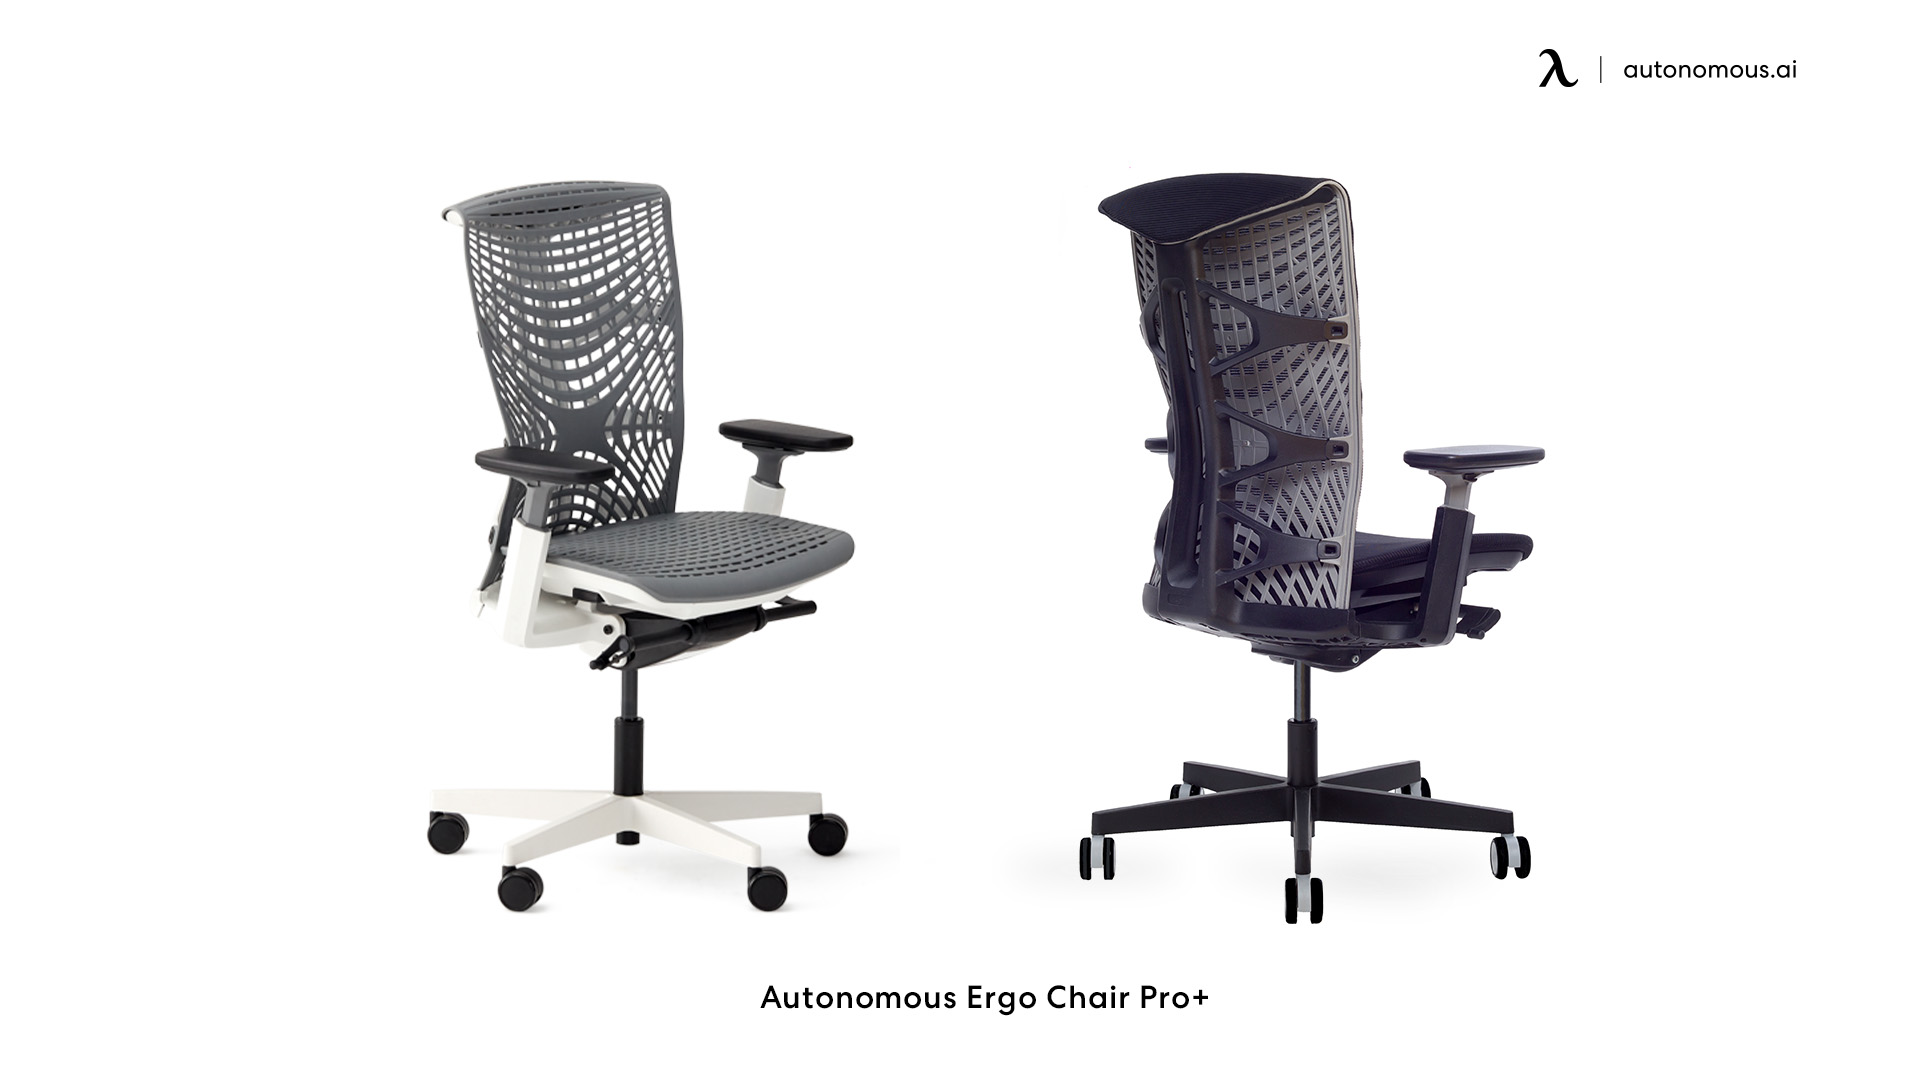 ErgoChair Pro+ office chair with adjustable arms